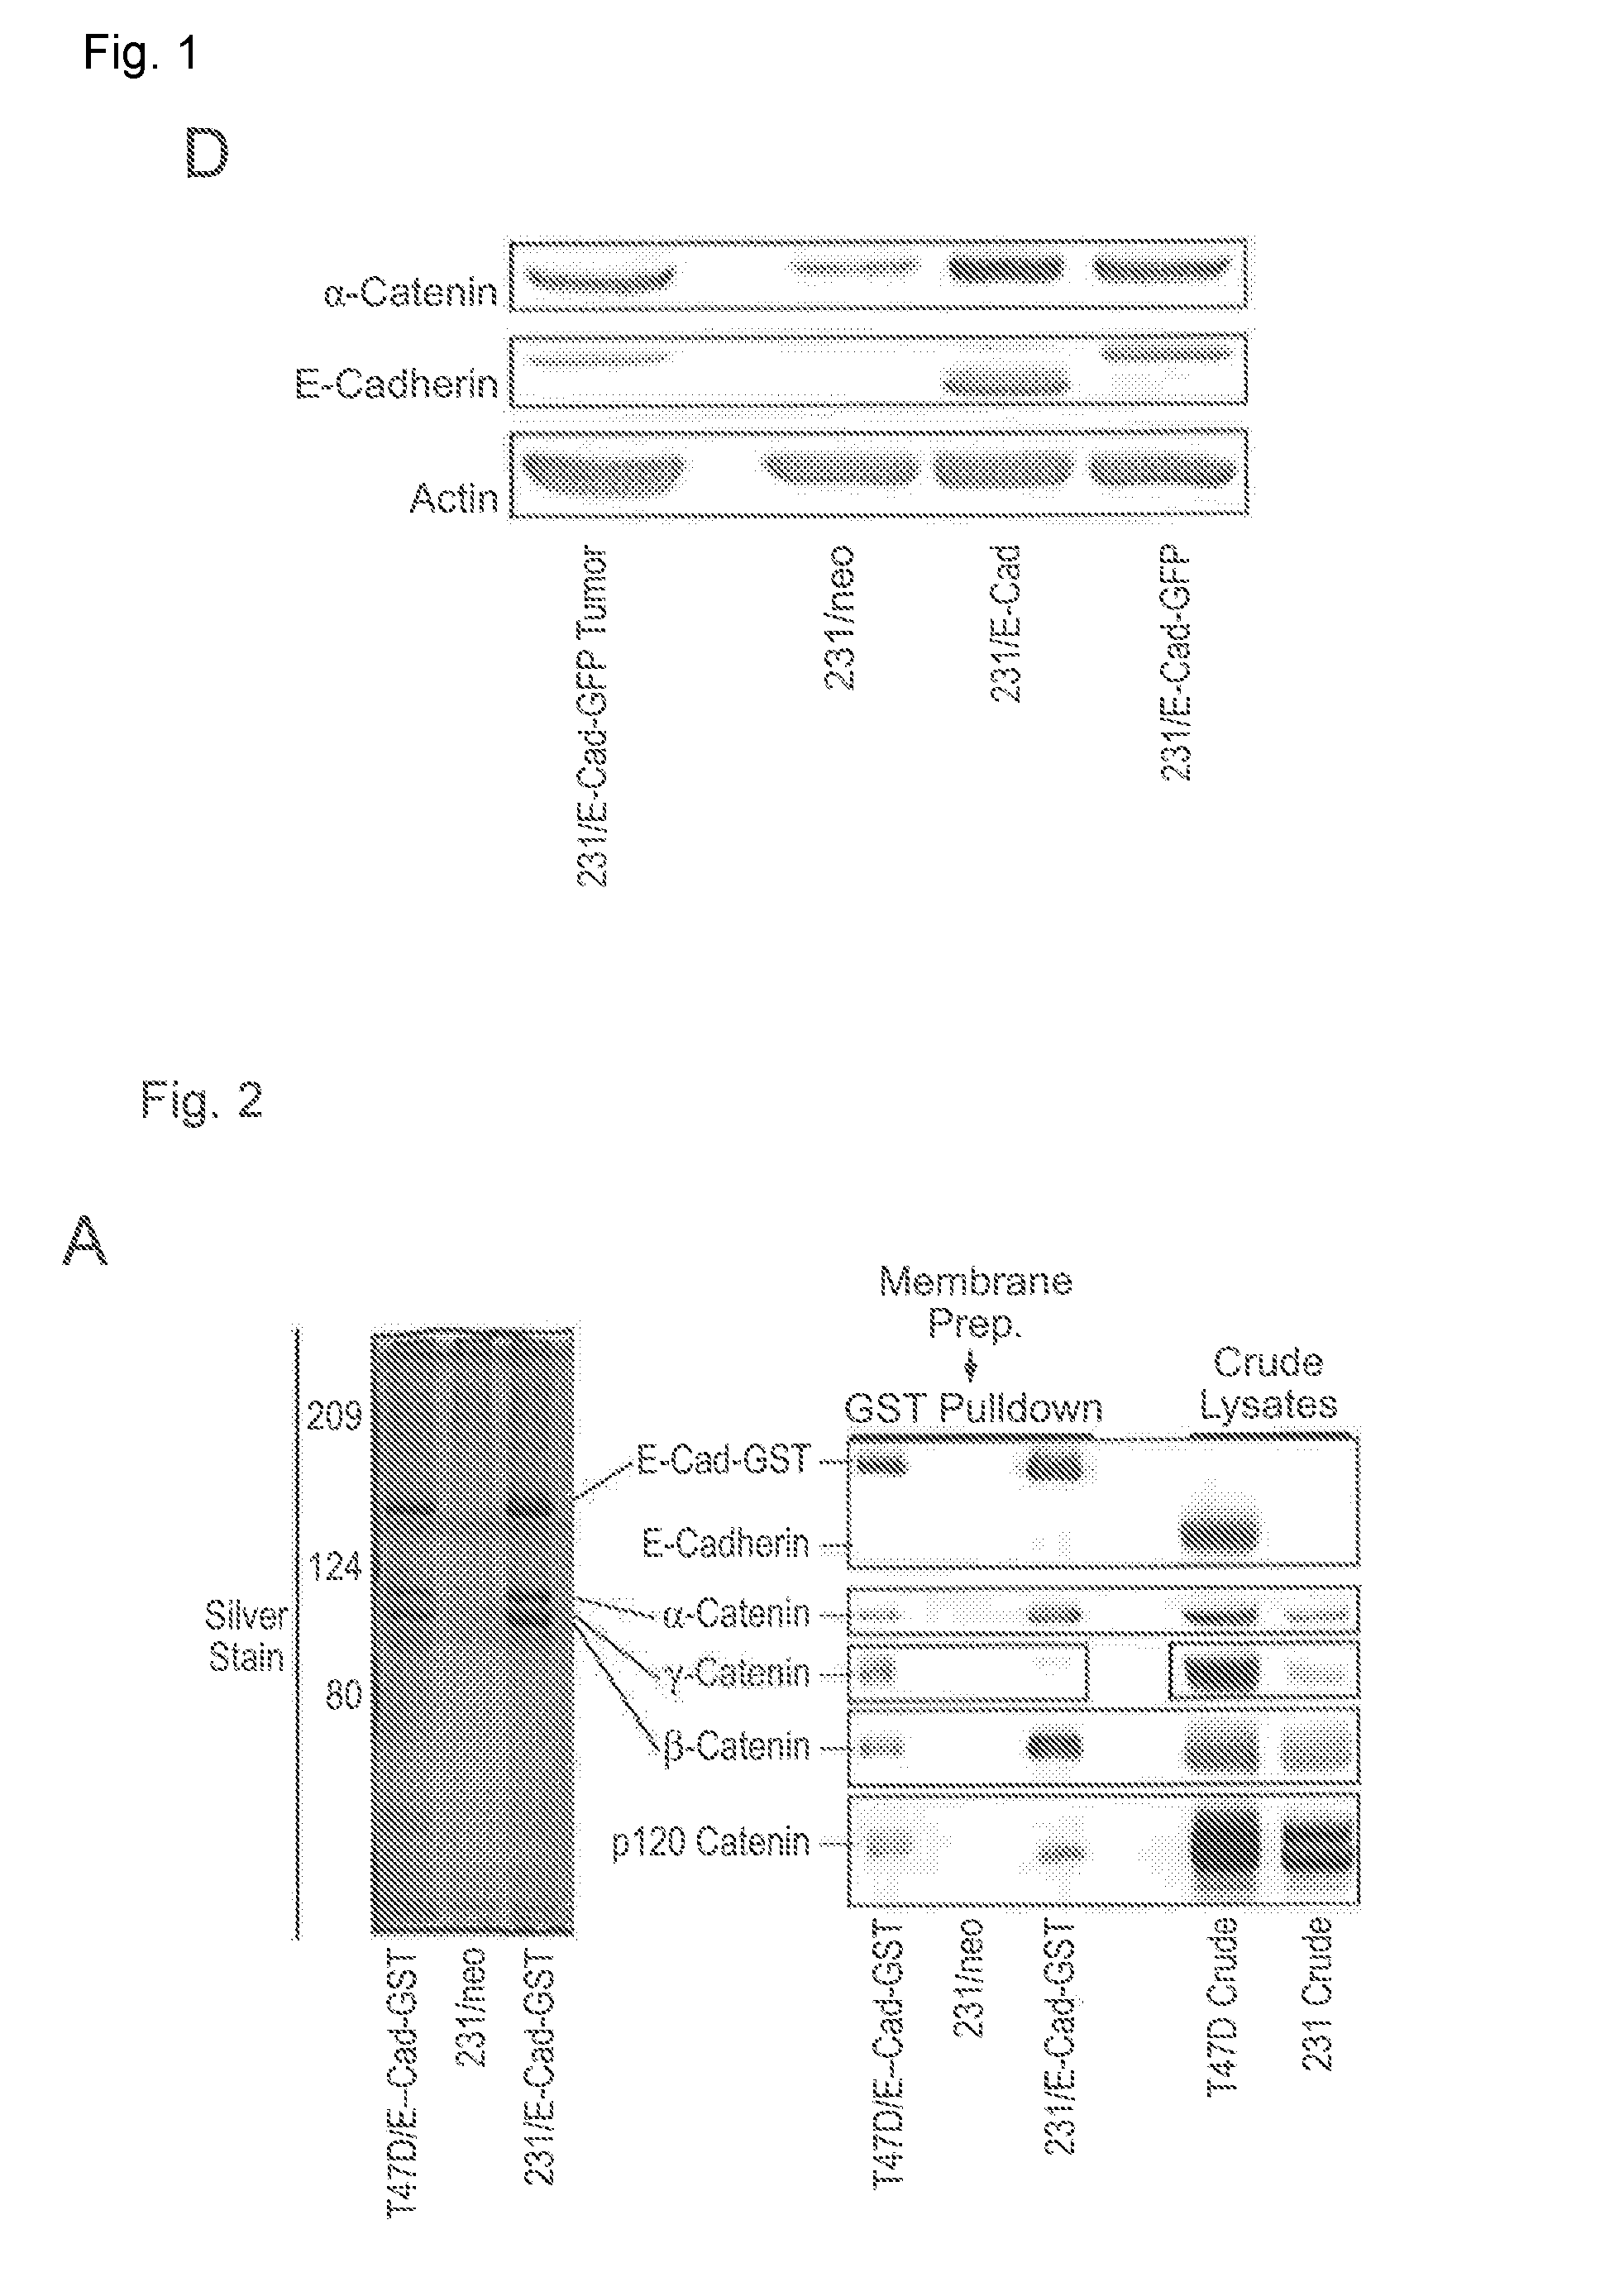 Combination compositions and methods of treatment